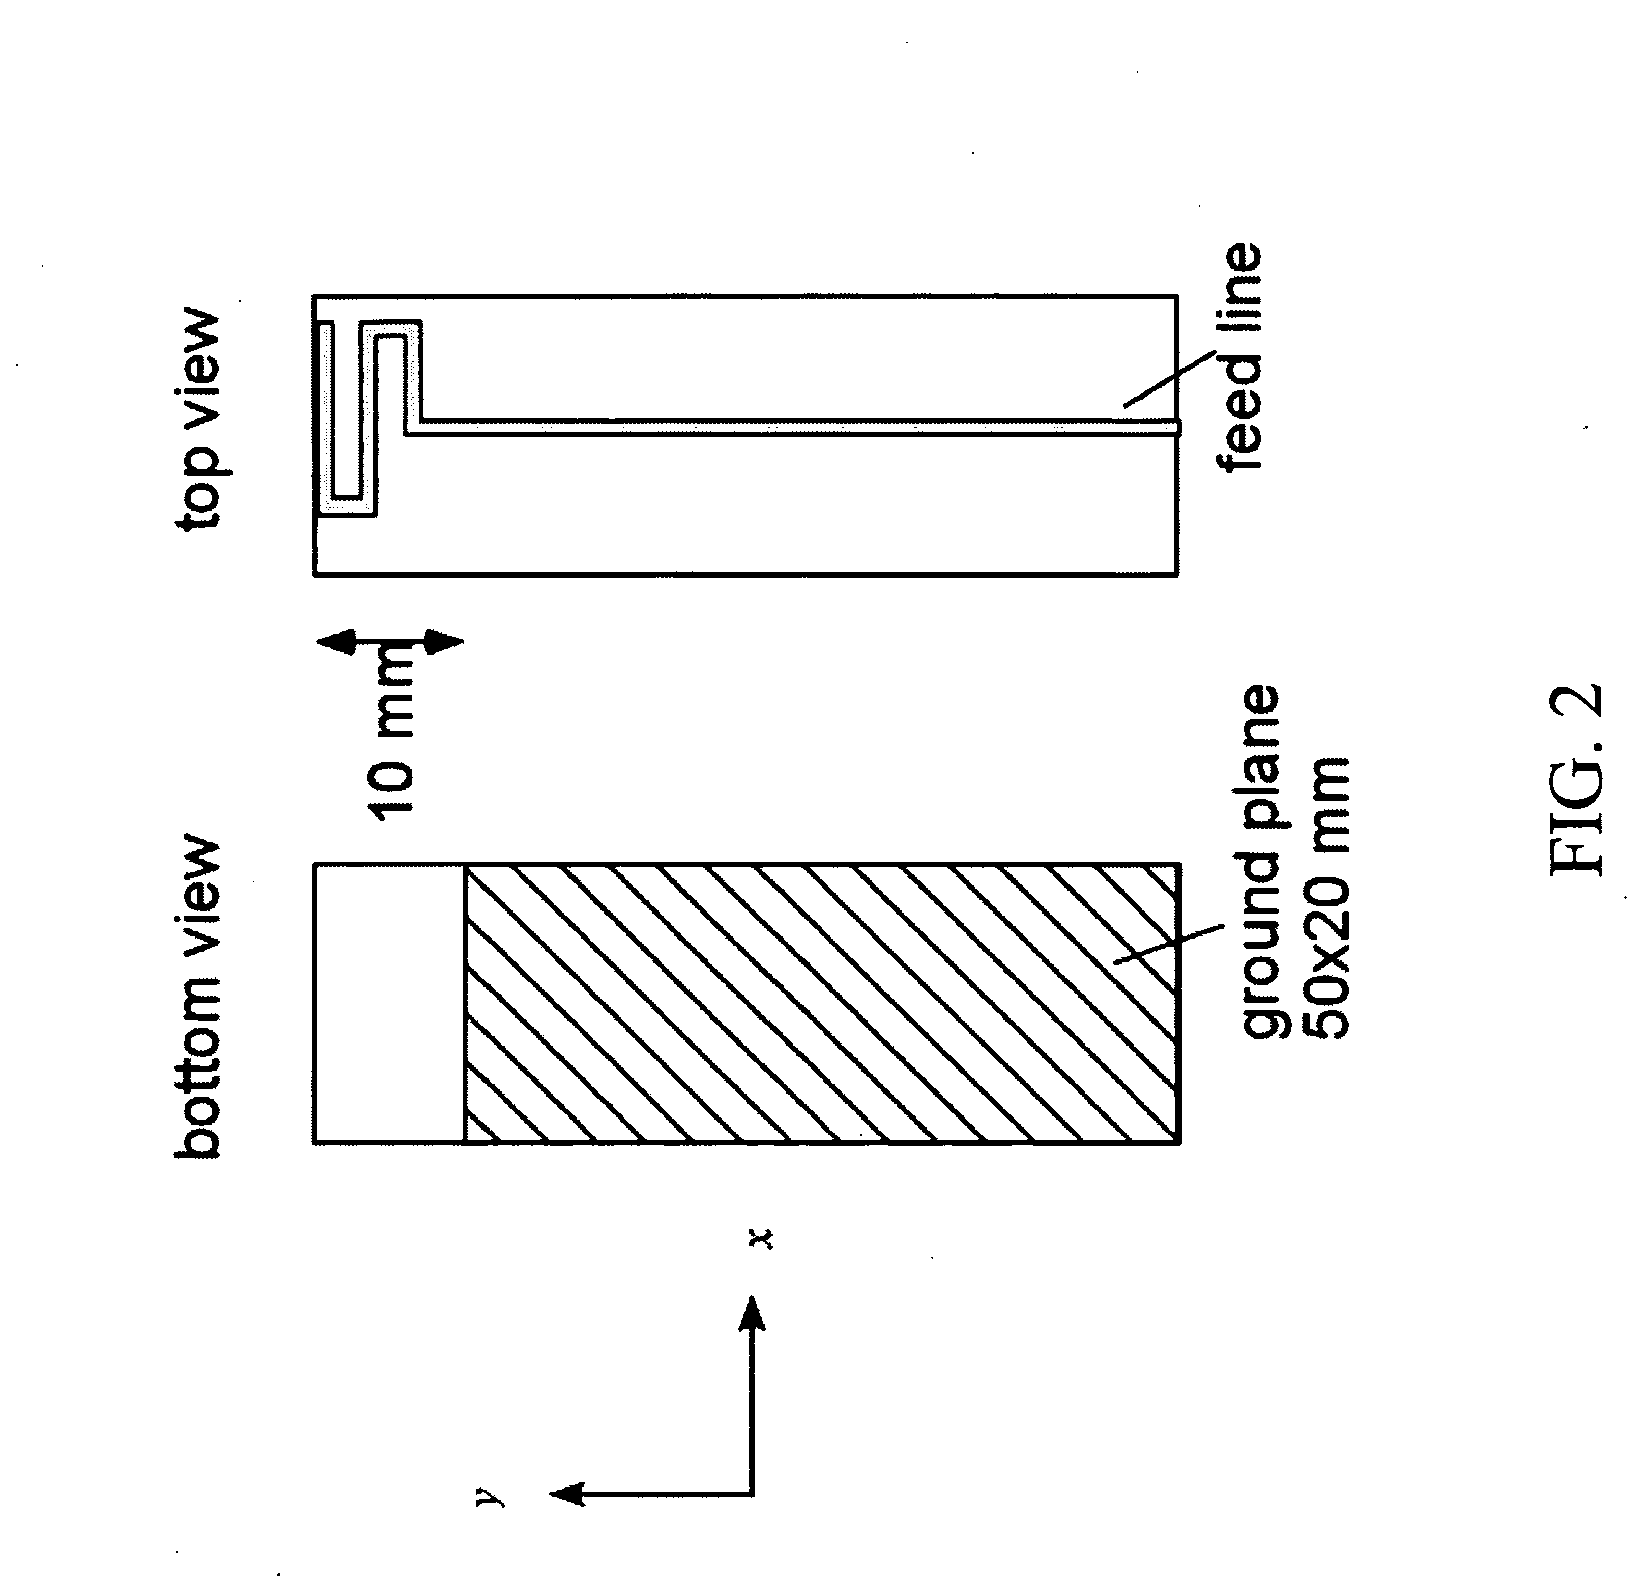 Compact antenna with directed radiation pattern